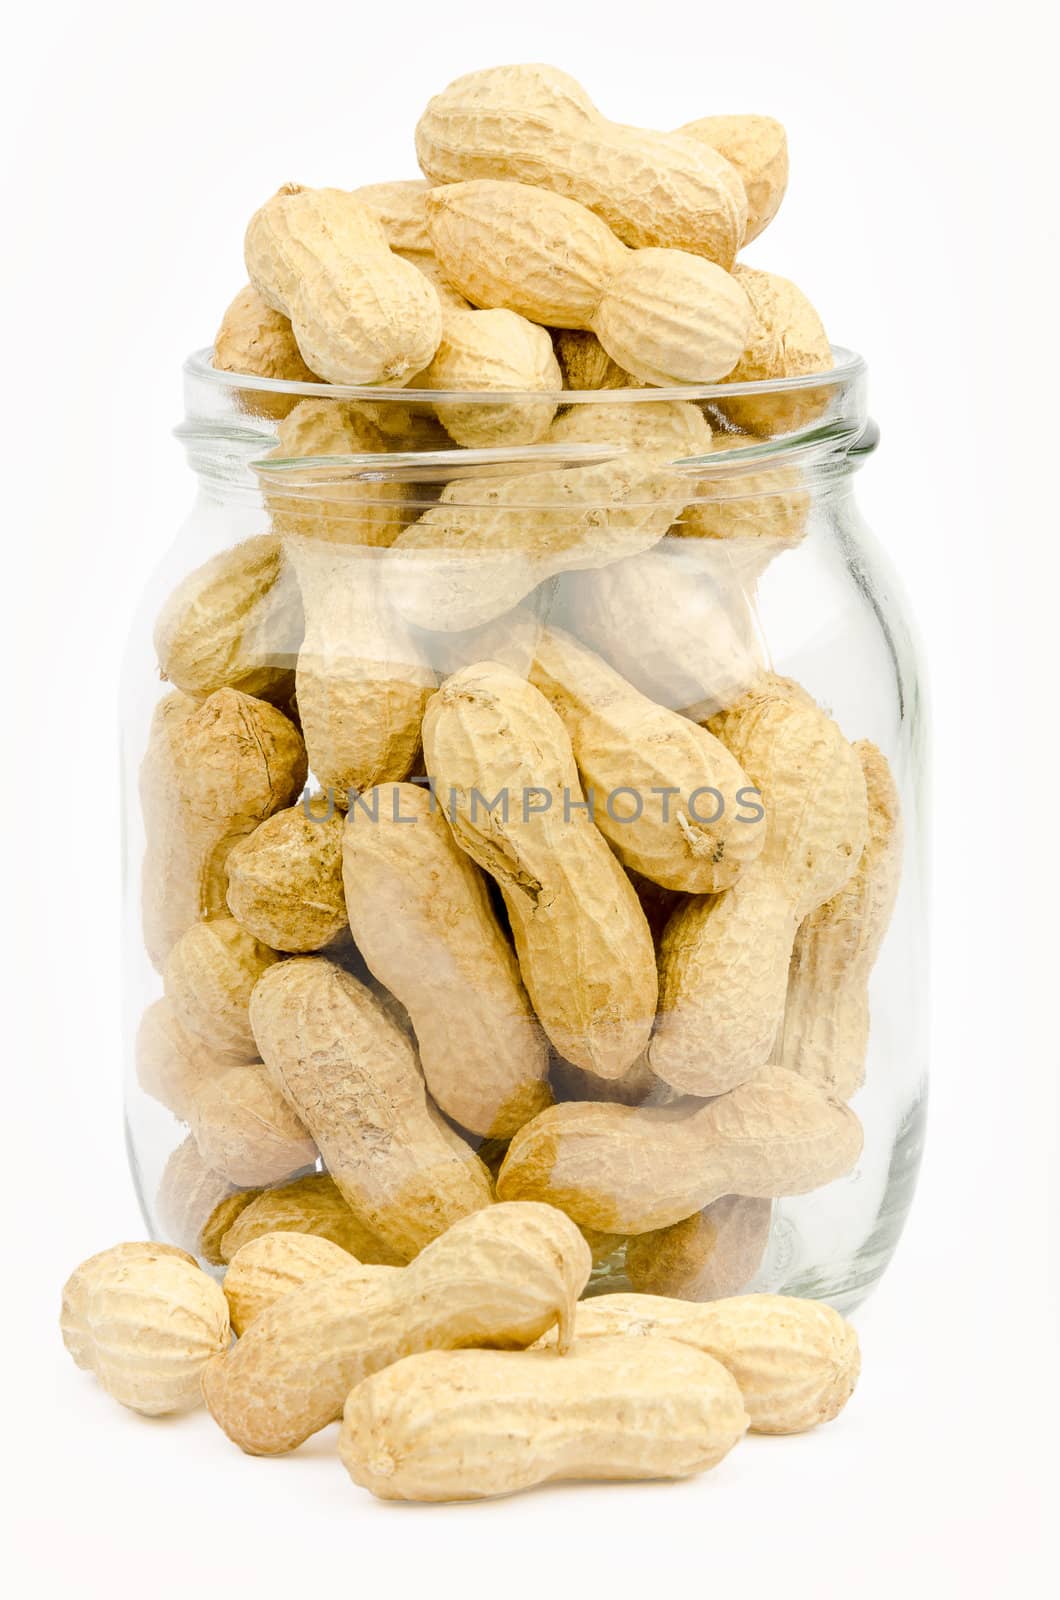 A jar full of unpeeled peanuts on a white background by velislava